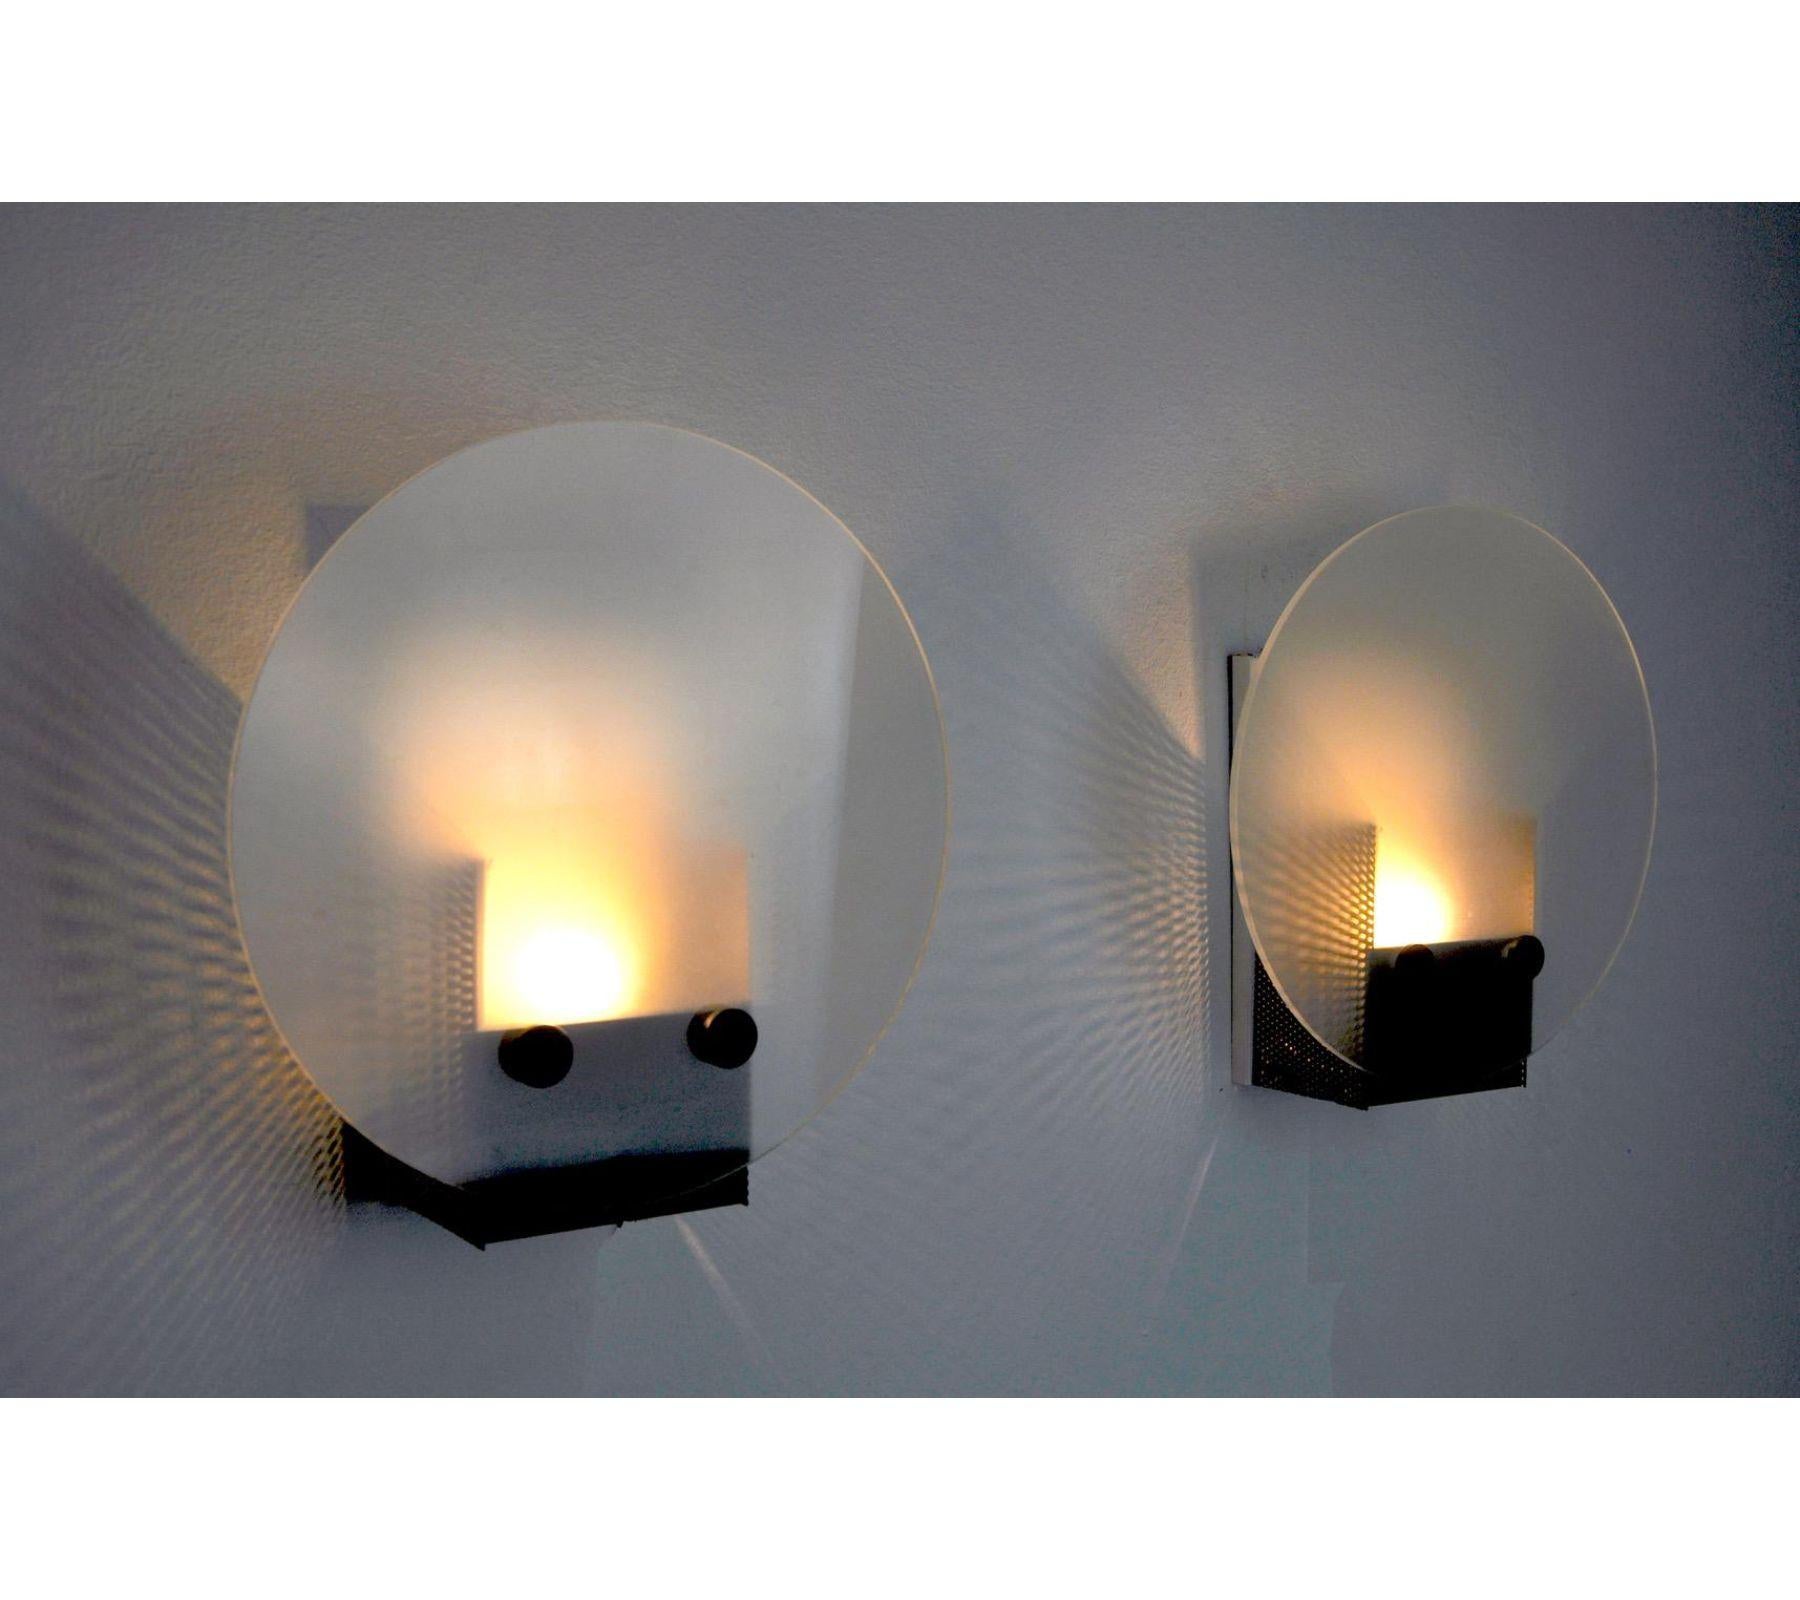 Metal 1970s Memphis Styled Wall Lamps, Spain, a Pair For Sale